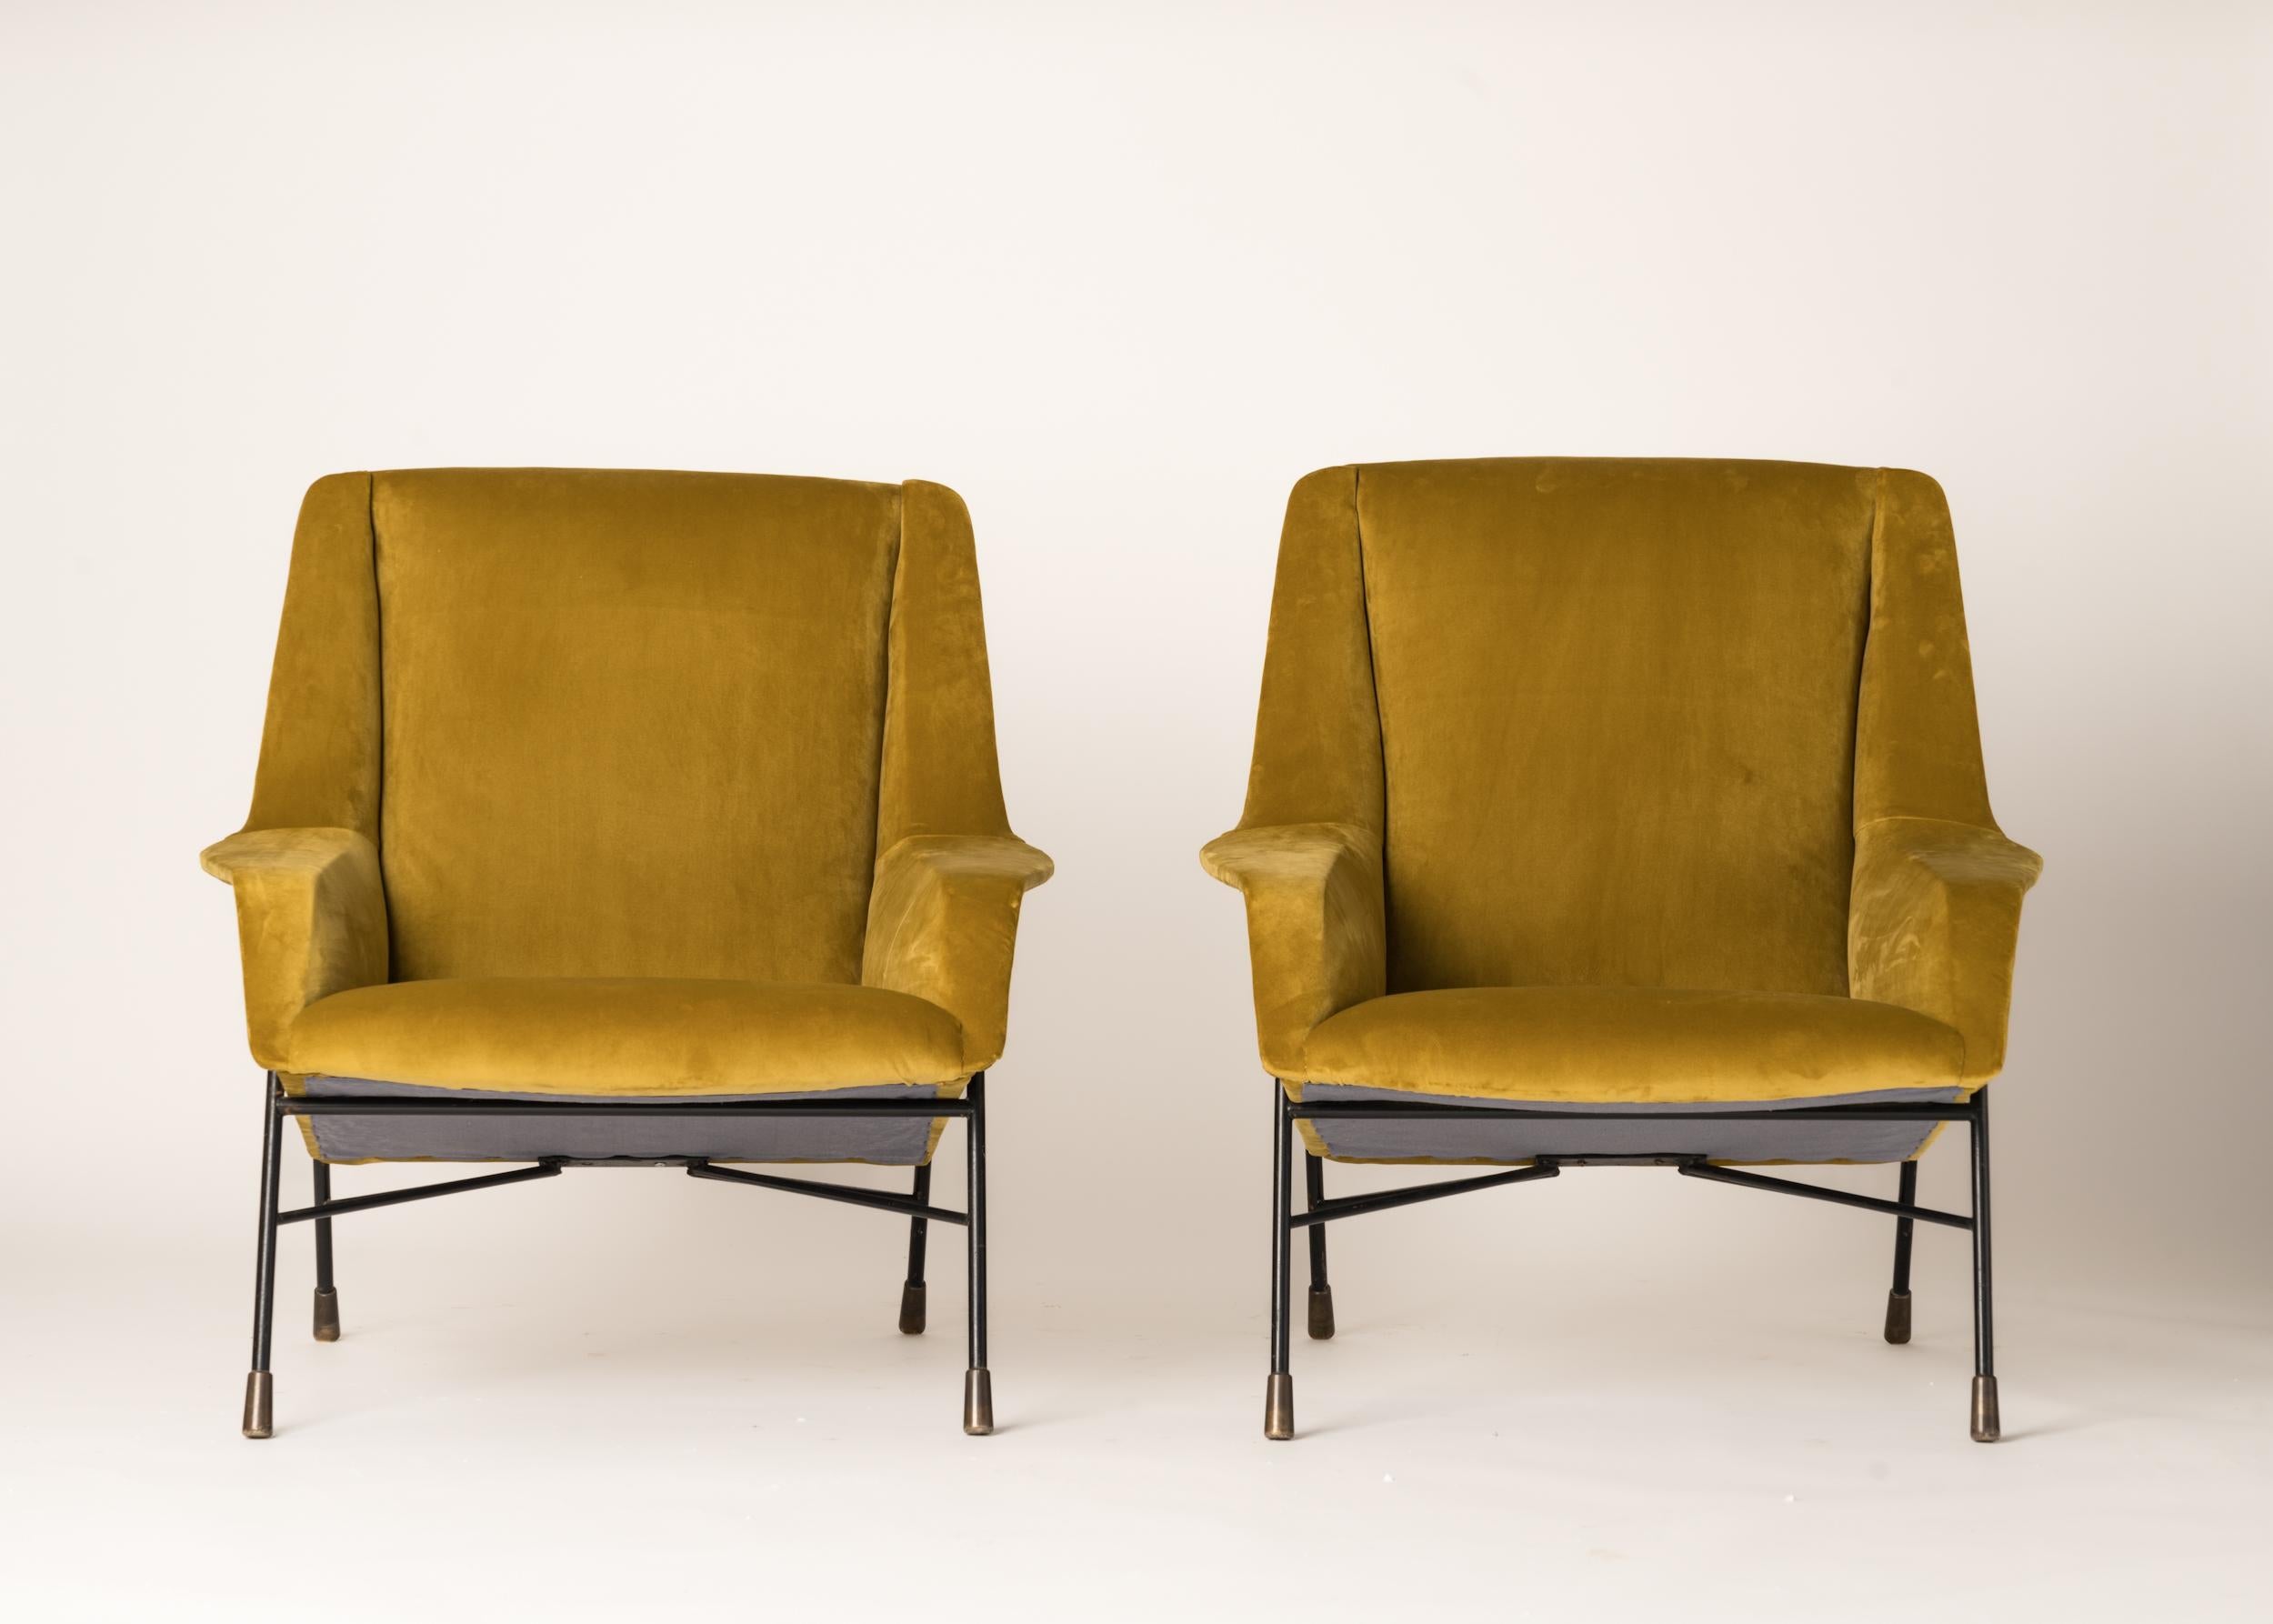 Rare pair of lounge chairs by the known Belgium designer Alfred Hendrickx. The models shown is documented as the S12 model produced by Belform, Belgium in the late 1950s.
The legs are finished with solid brass details on the feet, which gives the